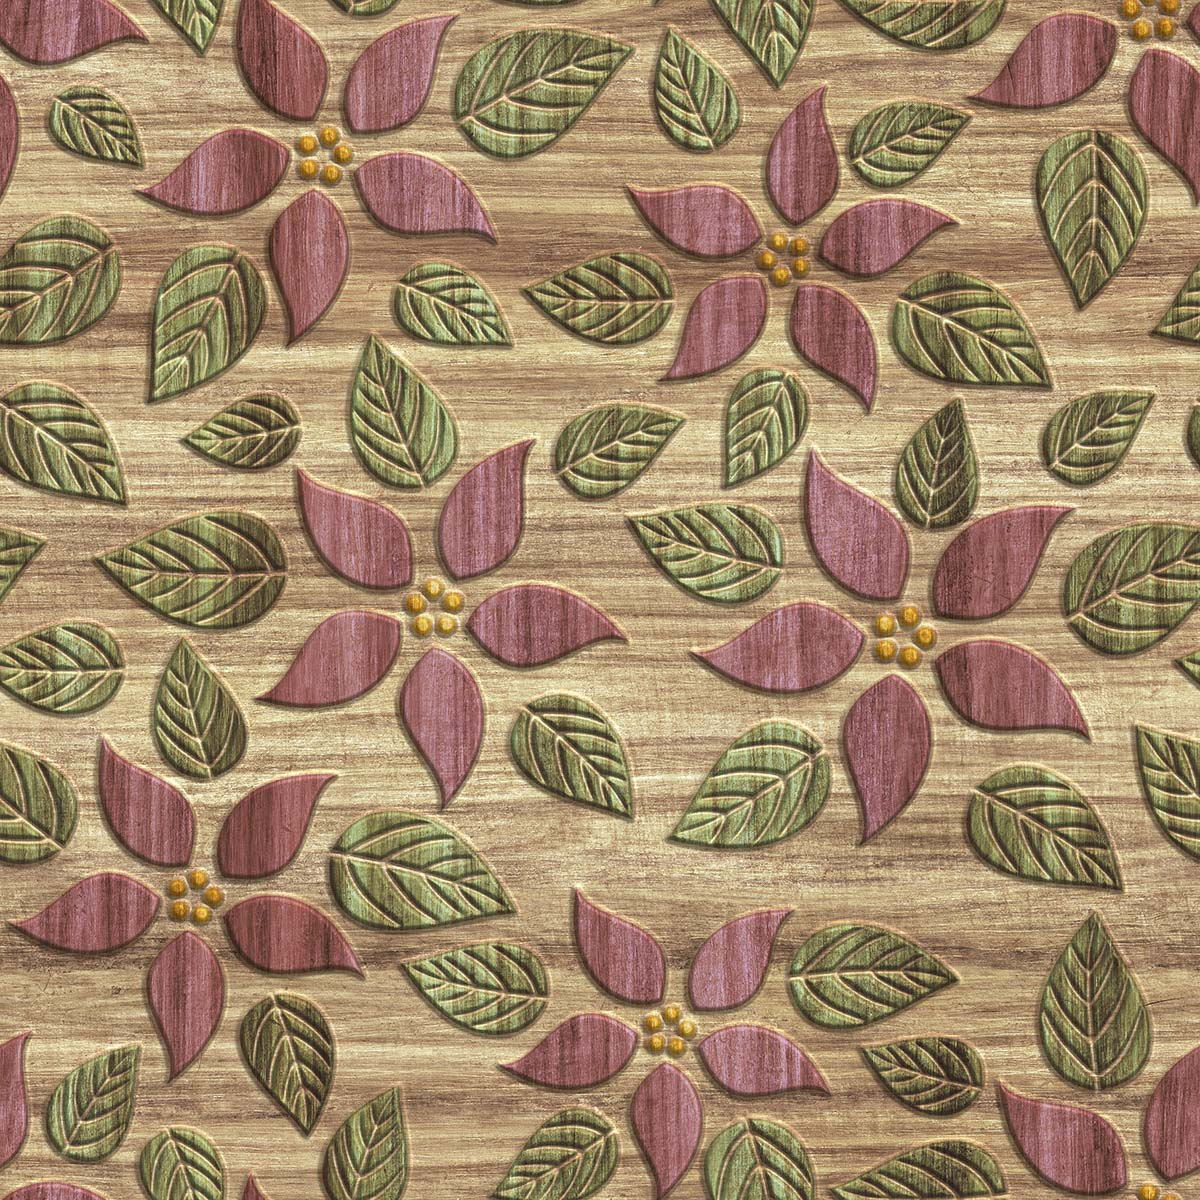 A pattern of flowers and leaves on a wood surface